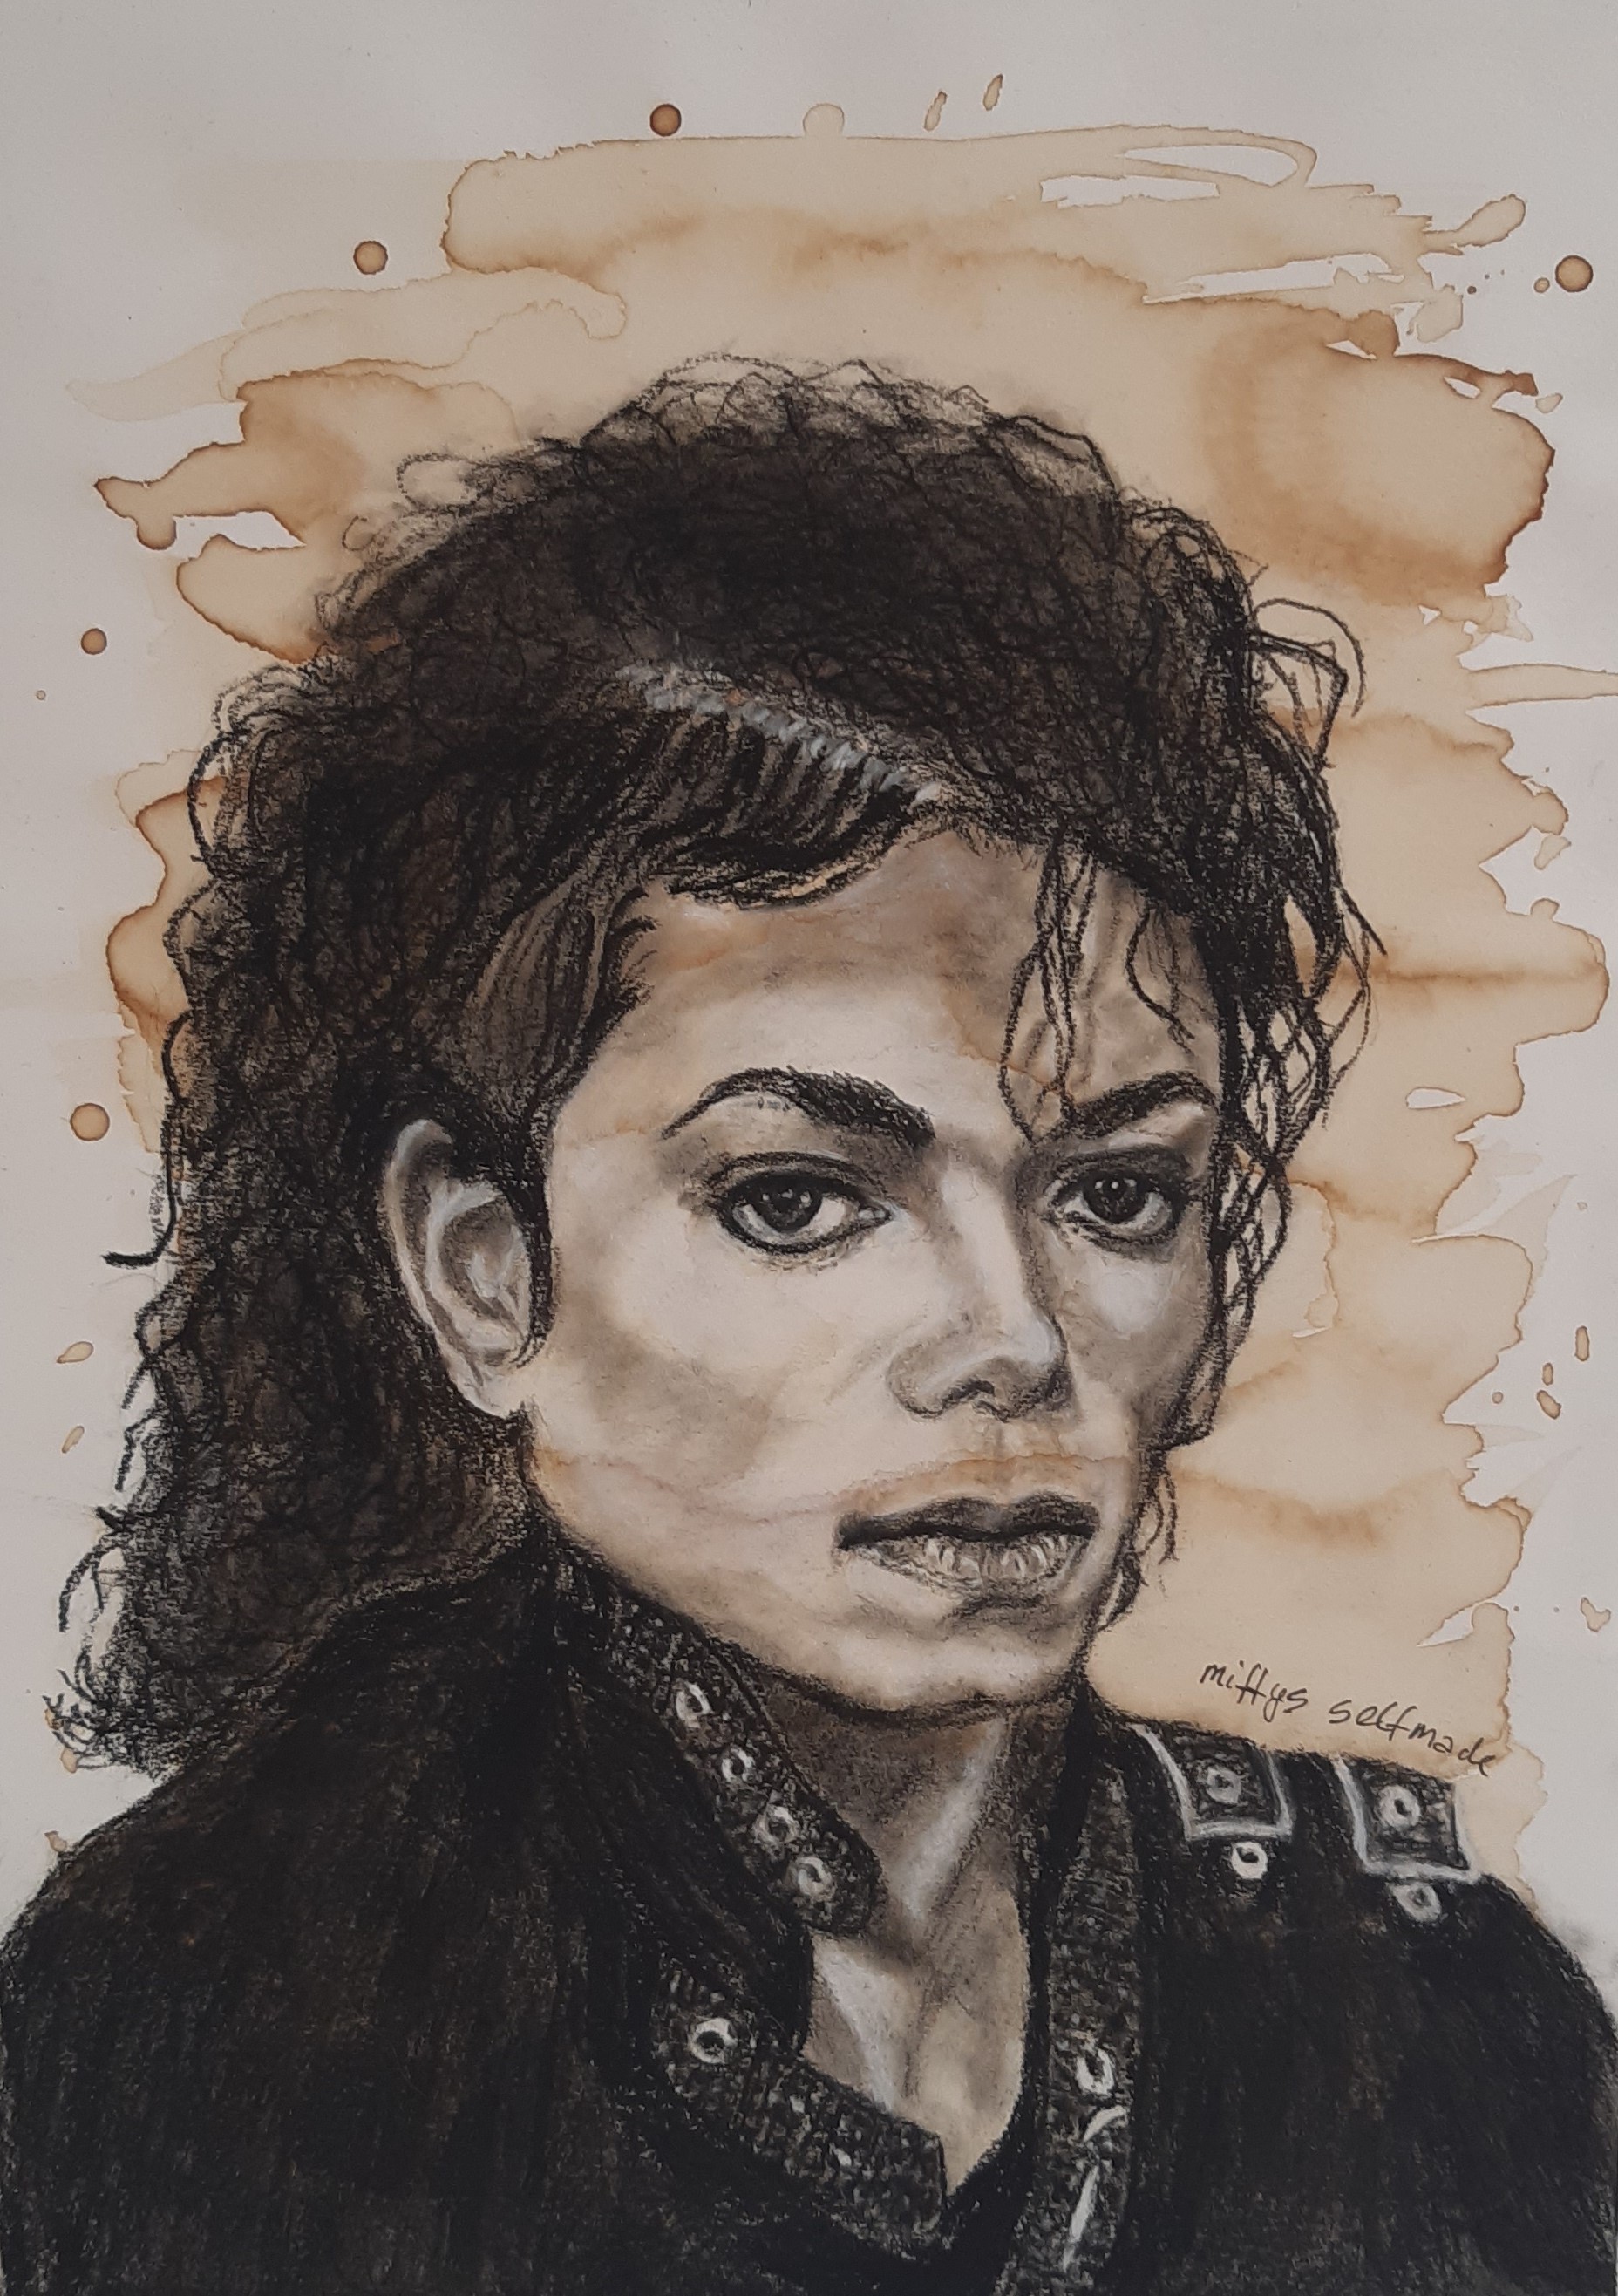 coffee Bad - Michael Jackson Official Site